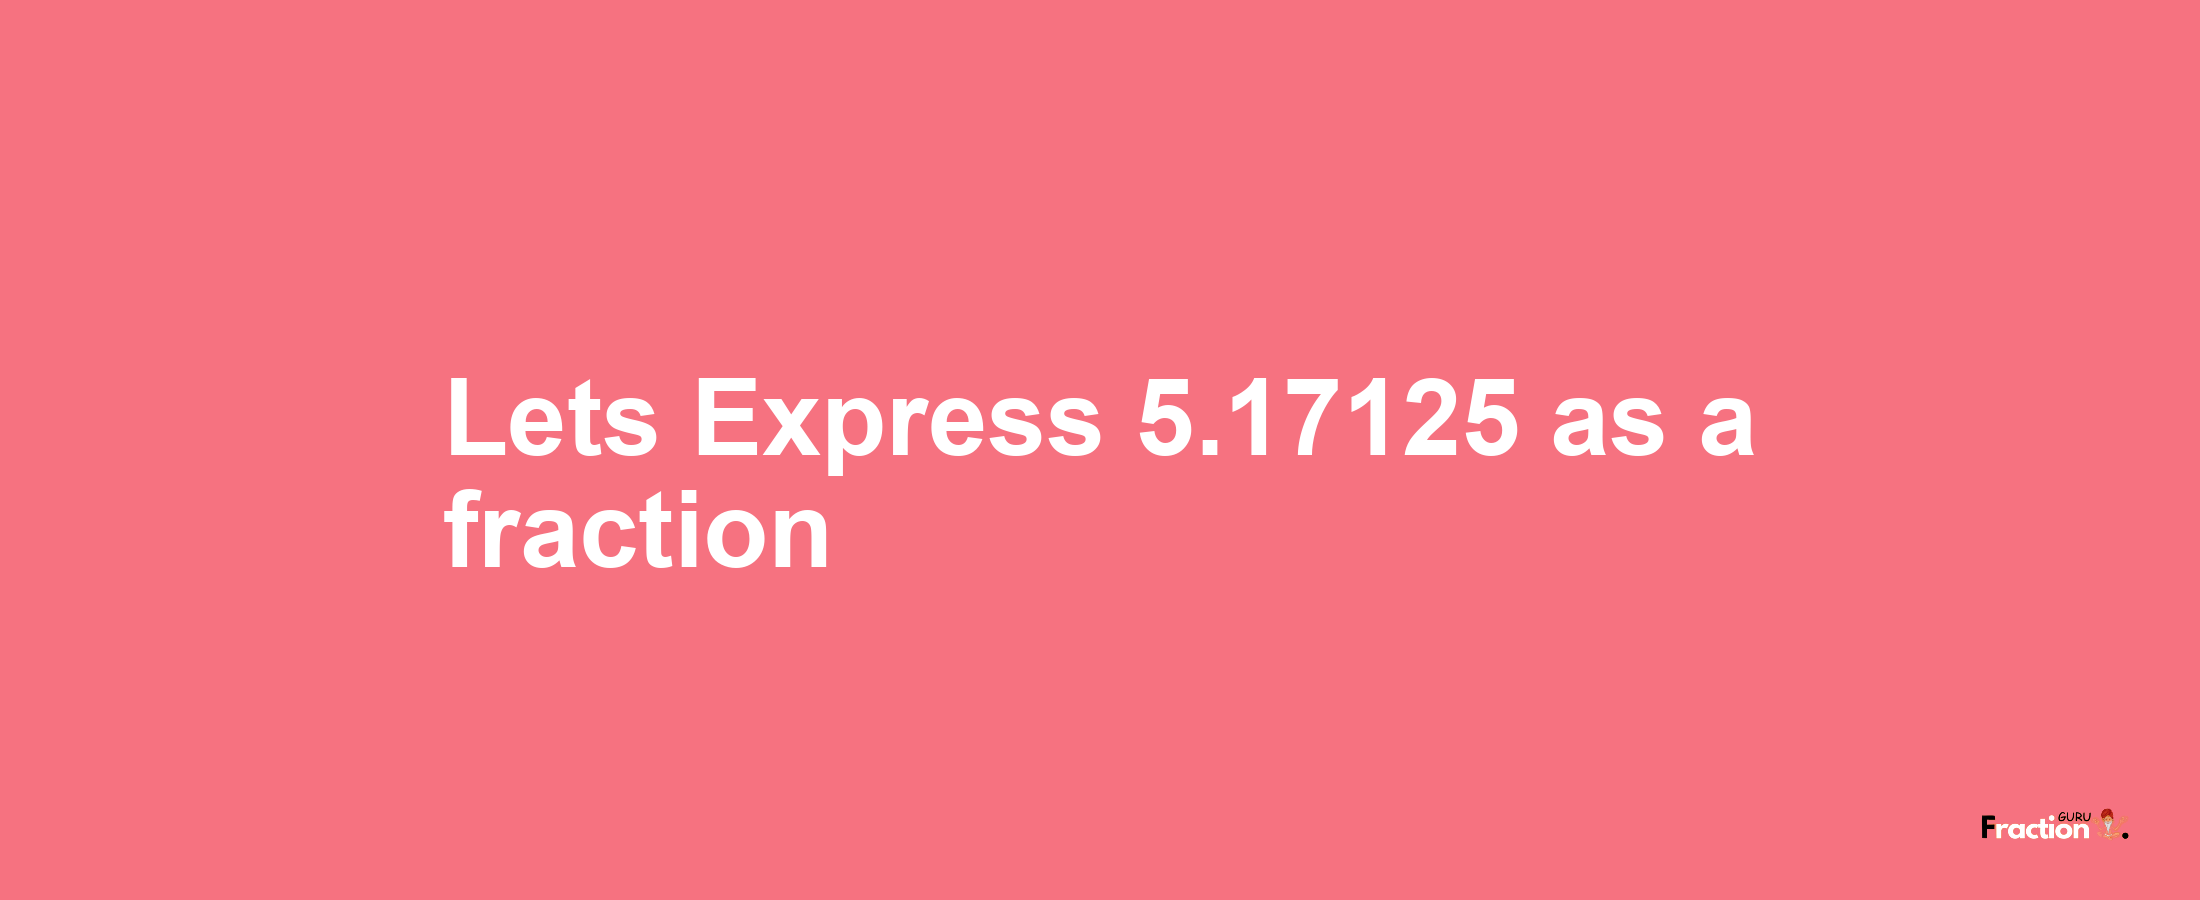 Lets Express 5.17125 as afraction